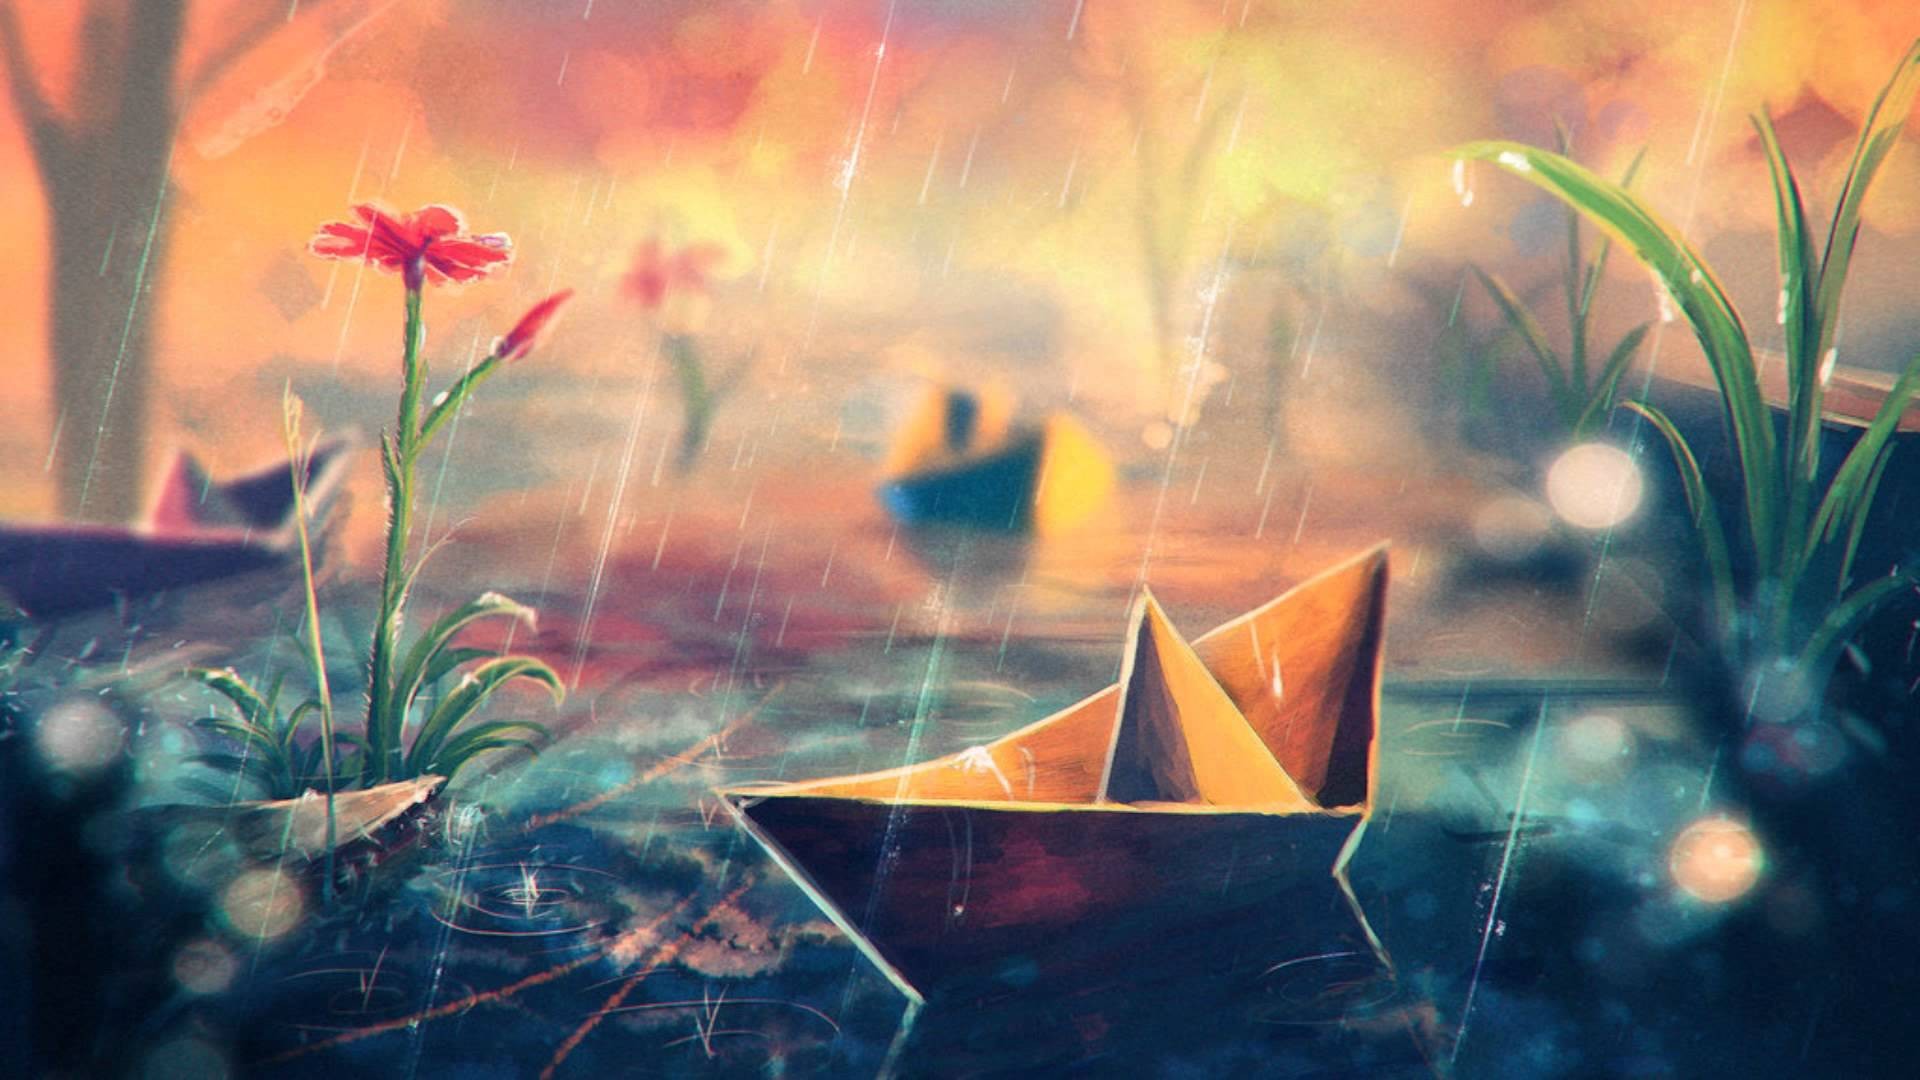 Sylar Artwork Flowers Paper Boats Water 1920x1080